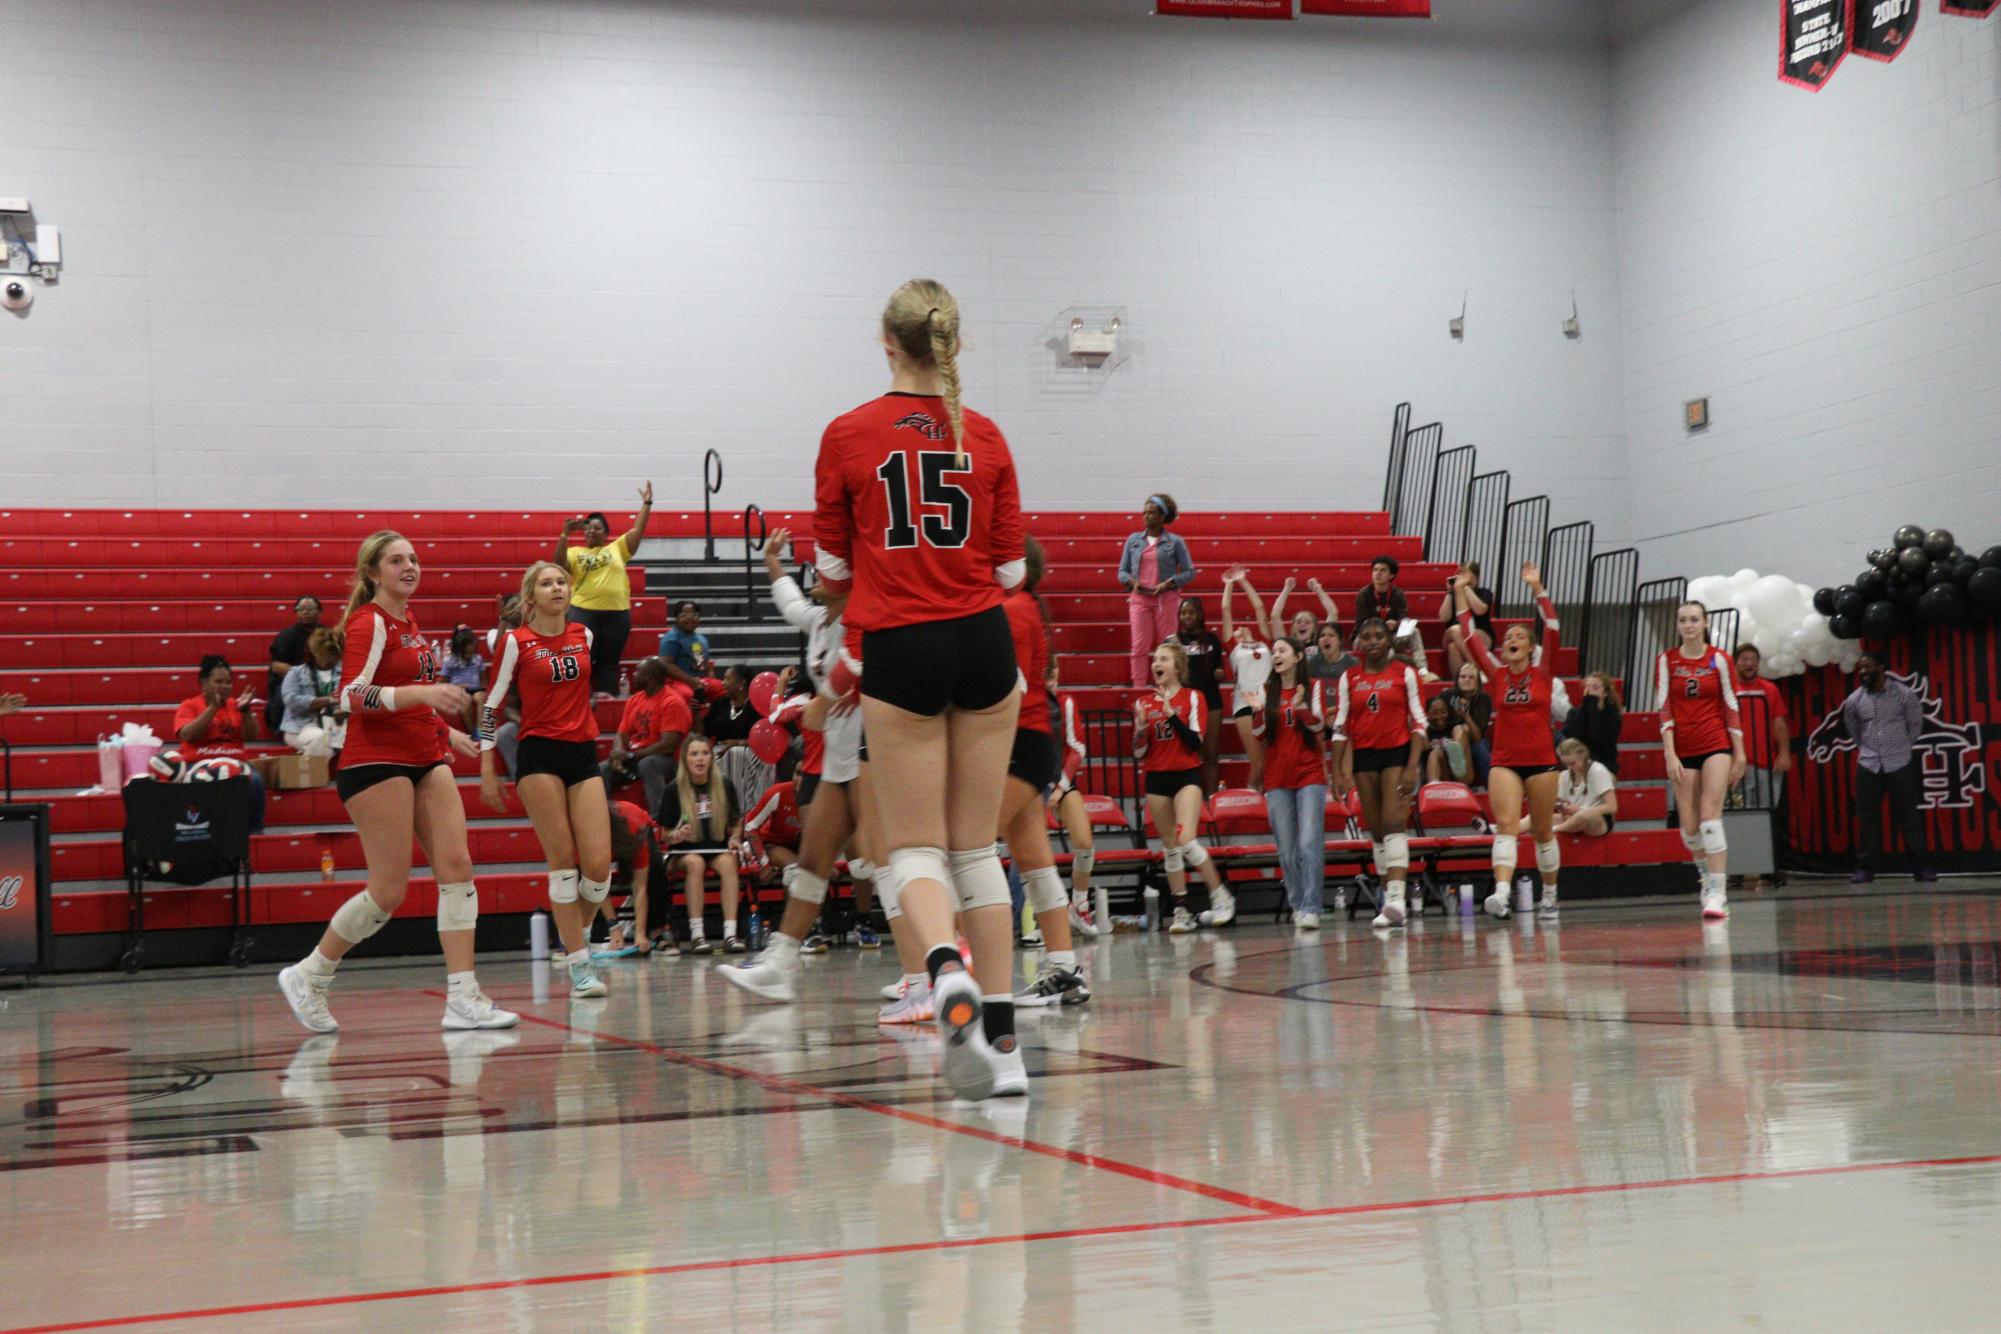 On+Tuesday%2C+October+3rd+for+their+senior+night%2C+the+varsity+volleyball+team+defeated+Saltillo+High+School%2C+25-19%2C+25-22%2C+25-17.+It+was+the+second+meeting+between+the+two+6A+squads+this+season.+Center+Hill+now+sits+8-2+in+district+play.